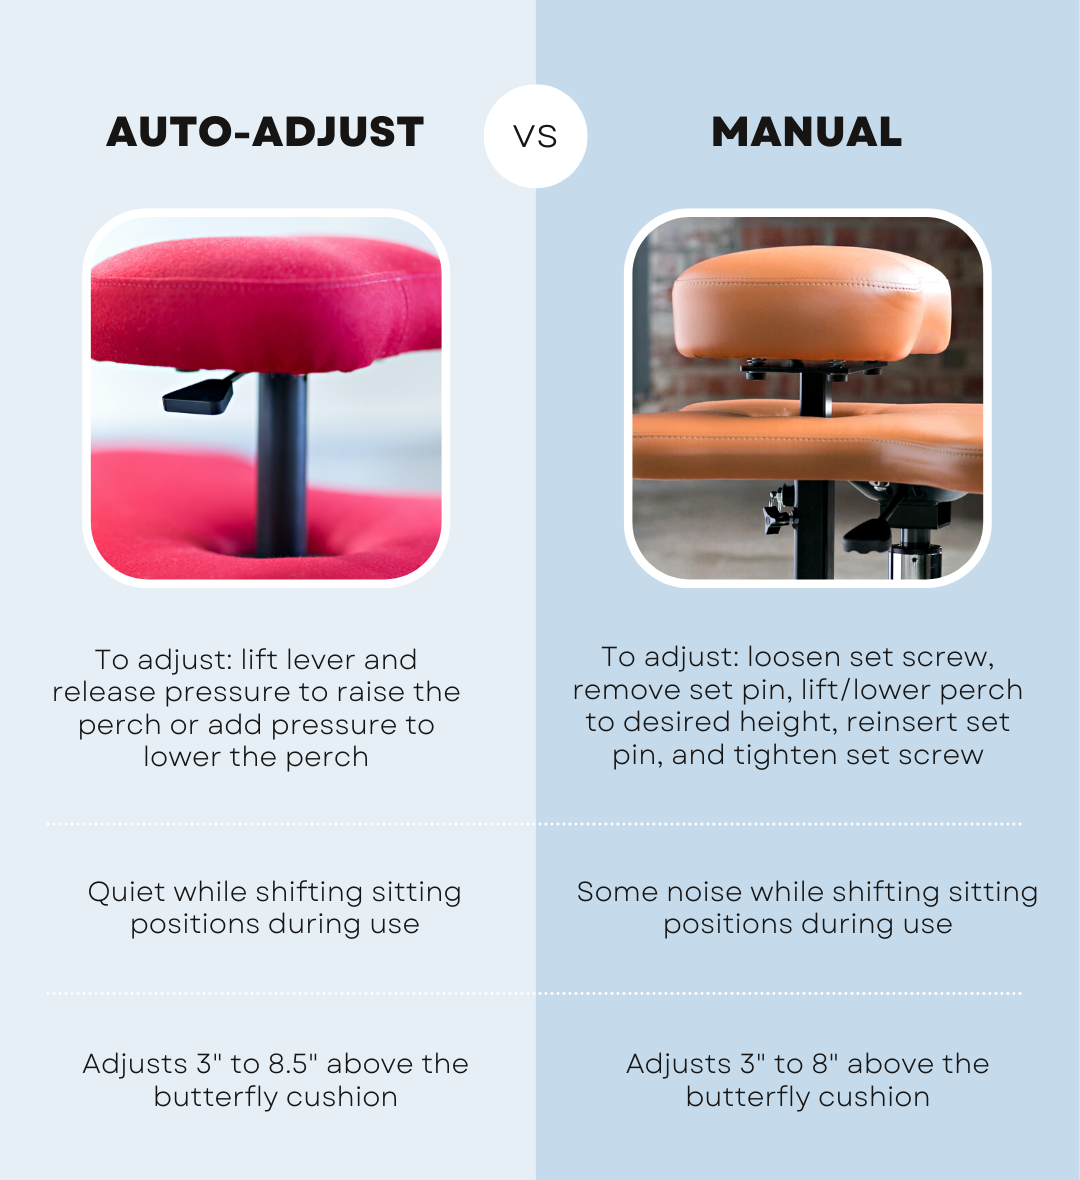 Raising the Backrest Height of the Couch: Benefits and Tips